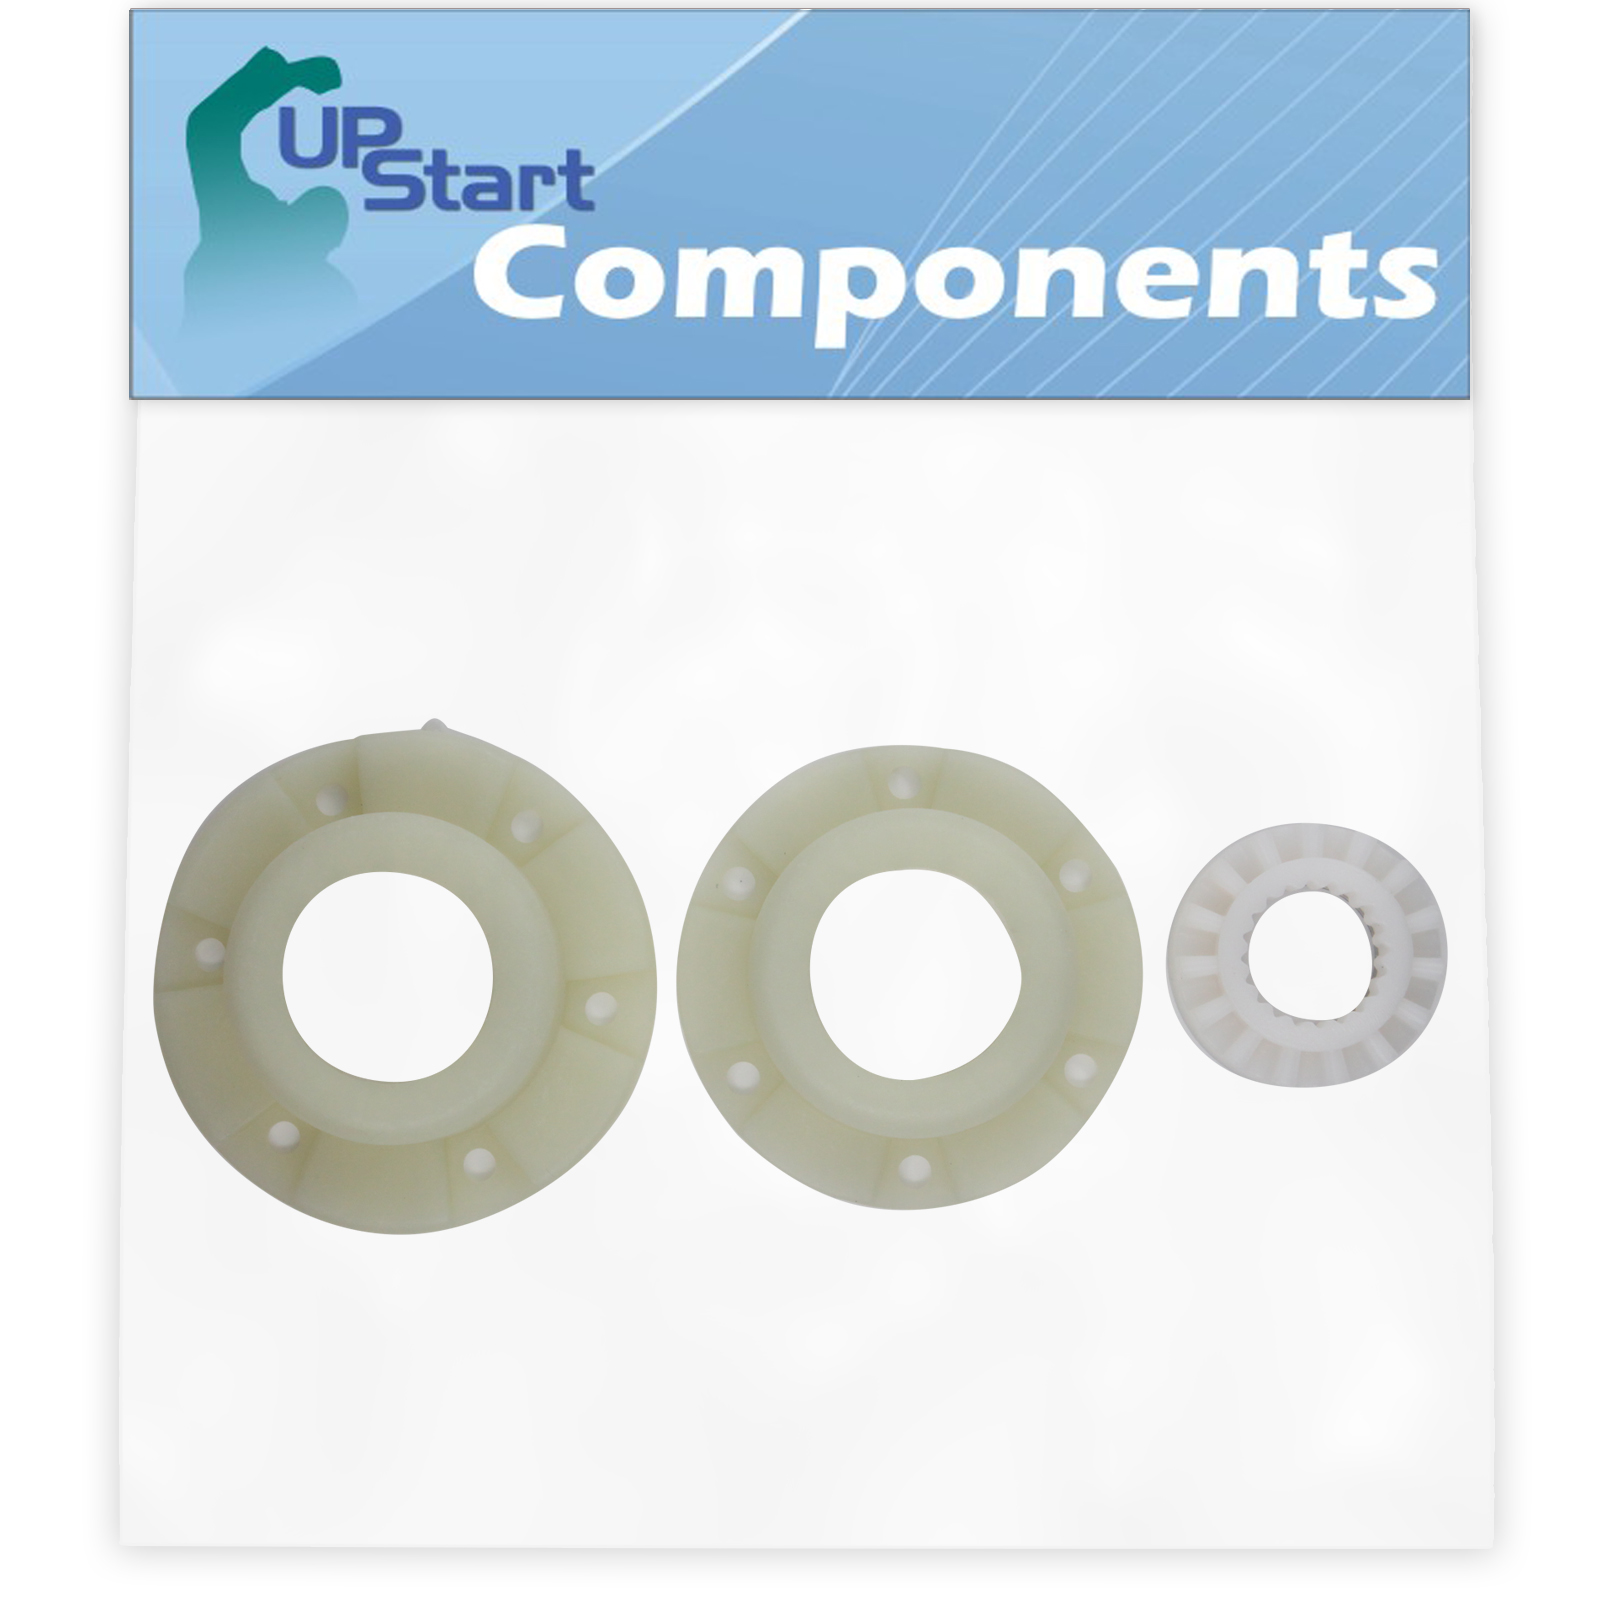 W10820039 Hub Kit Replacement for Whirlpool WTW6400SW2 Washer - Compatible with 280145 Basket Hub Kit - UpStart Components Brand - image 1 of 4